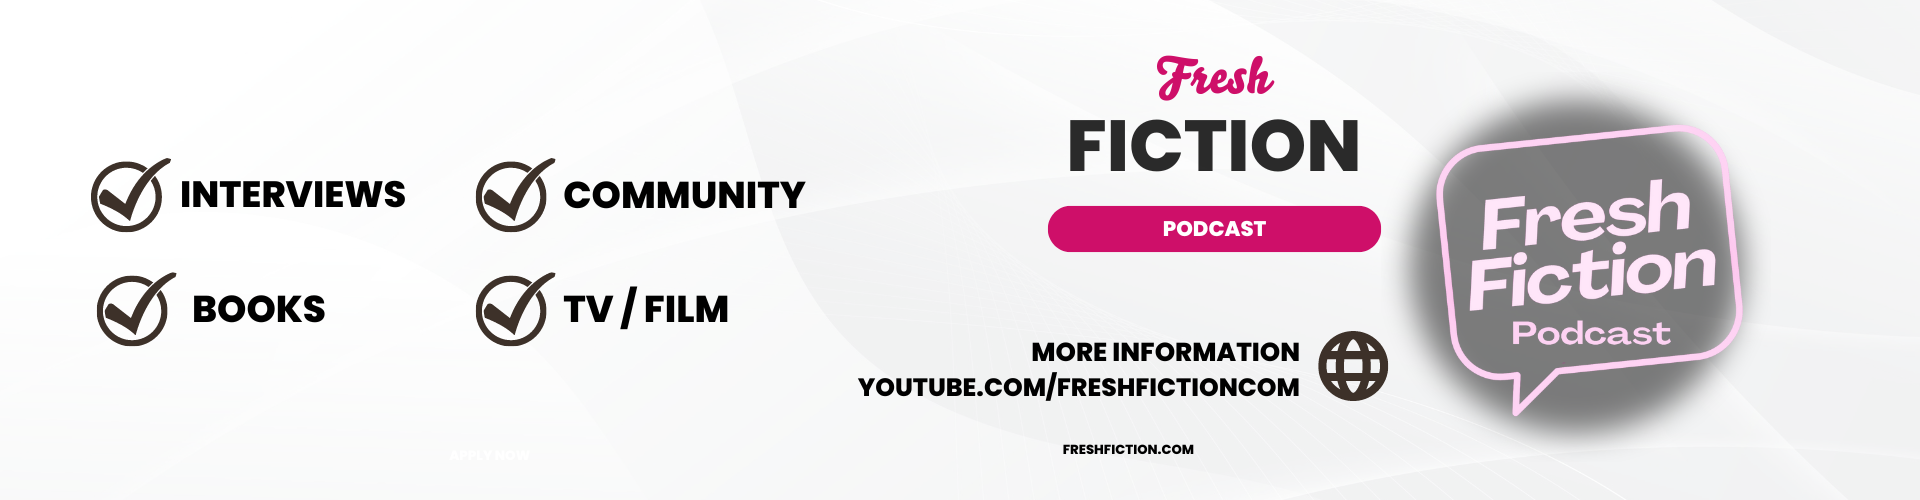 The Fresh Fiction Podcast